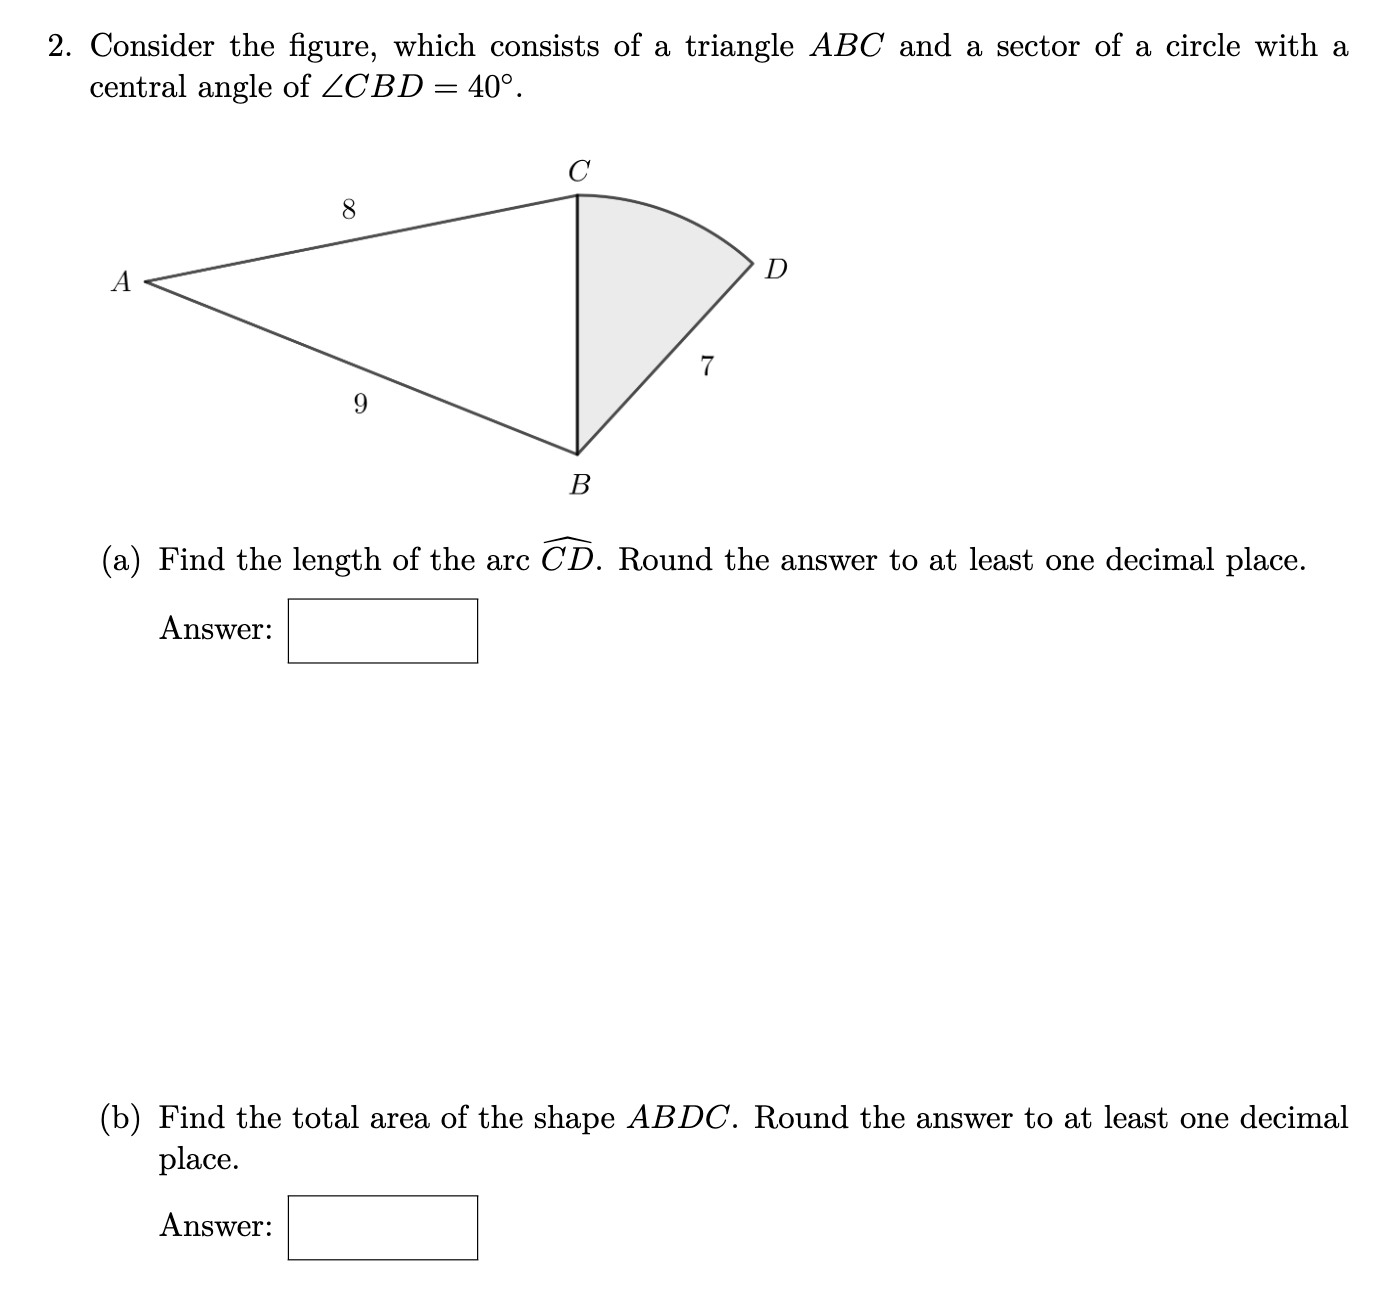 **Geometry Problem**

**2. Consider the figure, which consists of a triangle \( ABC \) and a sector of a circle with a central angle of \( \angle CBD = 40^\circ \).**

![Diagram consisting of a triangle \(ABC\) and a sector with a central angle of \(40^\circ\). The lengths of \(AB\) and \(AC\) are labeled as \(9\) and \(8\) respectively. The point \(D\) is on the arc. The length \(BC\) is labeled as \(7\).]

### (a) Find the length of the arc \( \overset{\frown}{CD} \). Round the answer to at least one decimal place. 

**Answer:** [ ]

### (b) Find the total area of the shape \(ABDC\). Round the answer to at least one decimal place. 

**Answer:** [ ]

---

To solve the problems, apply the following concepts.

### (a) Length of Arc \( \overset{\frown}{CD} \)
To find the length of the arc \( \overset{\frown}{CD} \), use the formula for the length of an arc in a circle: 

\[ L = r \theta \]

where:
- \( r \) is the radius of the circle.
- \( \theta \) is the central angle in radians.

First, convert \( \theta \) from degrees to radians:

\[ \theta = 40^\circ \times \frac{\pi}{180^\circ} \]

Then, using the given length \( BC = 7 \) as the radius \( r \):

\[ L = 7 \times (\theta \text{ in radians}) \]

### (b) Total Area of Shape \(ABDC\)
The total area of shape \(ABDC\) is the sum of the area of triangle \(ABC\) and the area of the sector \(CD\).

**1. Area of Triangle \(ABC\):**
Use the formula for the area of a triangle with sides \(a\), \(b\), and the included angle \(C\):

\[ \text{Area} = \frac{1}{2} ab \sin(C) \]

Here \(a = 8\), \(b = 9\), and \(C = 180^\circ - \angle CBD\). Use the given angle \(\angle CBD = 